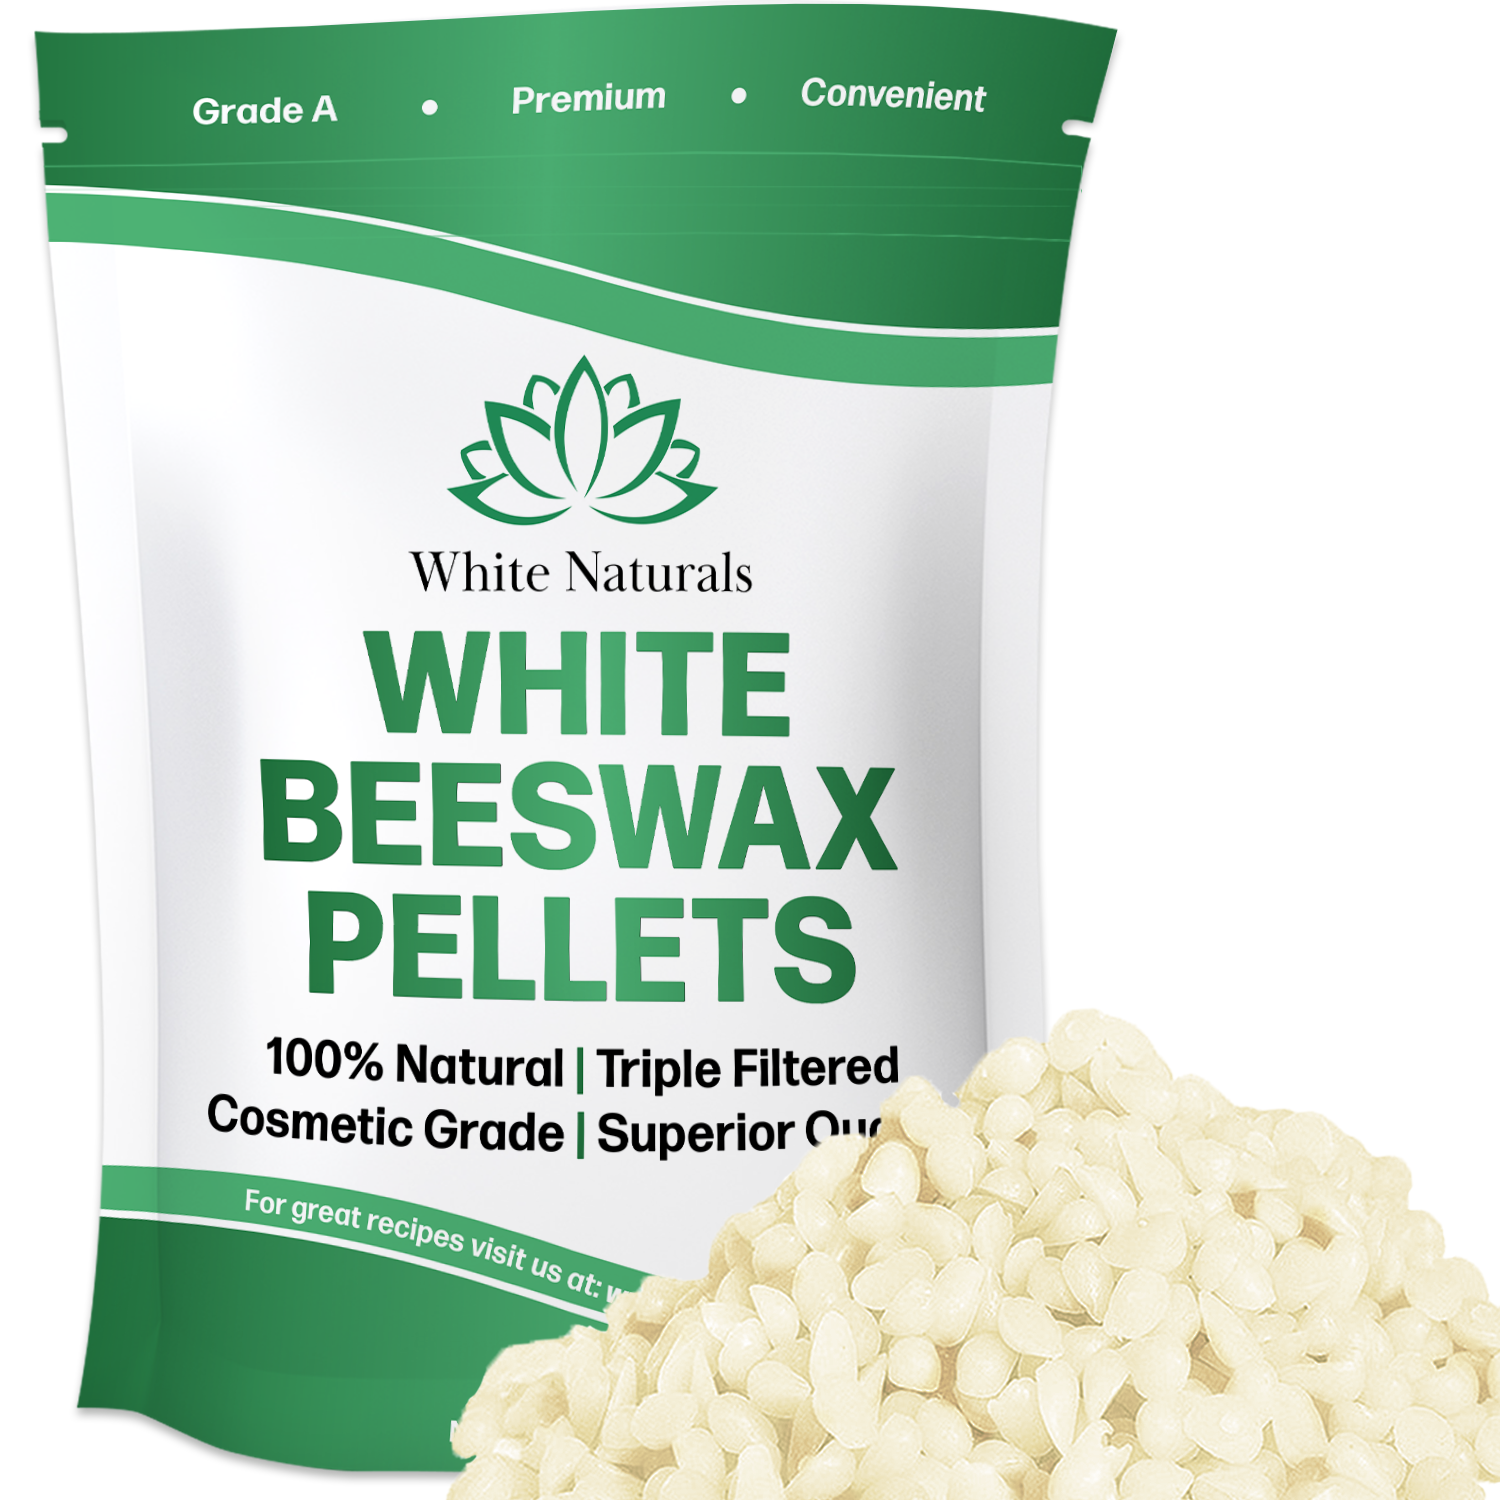 White Beeswax Pellets 8 oz 100% Pure And Natural Triple Filtered For Skin,  Face, Body and Hair Care DIY Creams, Lotions, Lip Balm and Soap Making